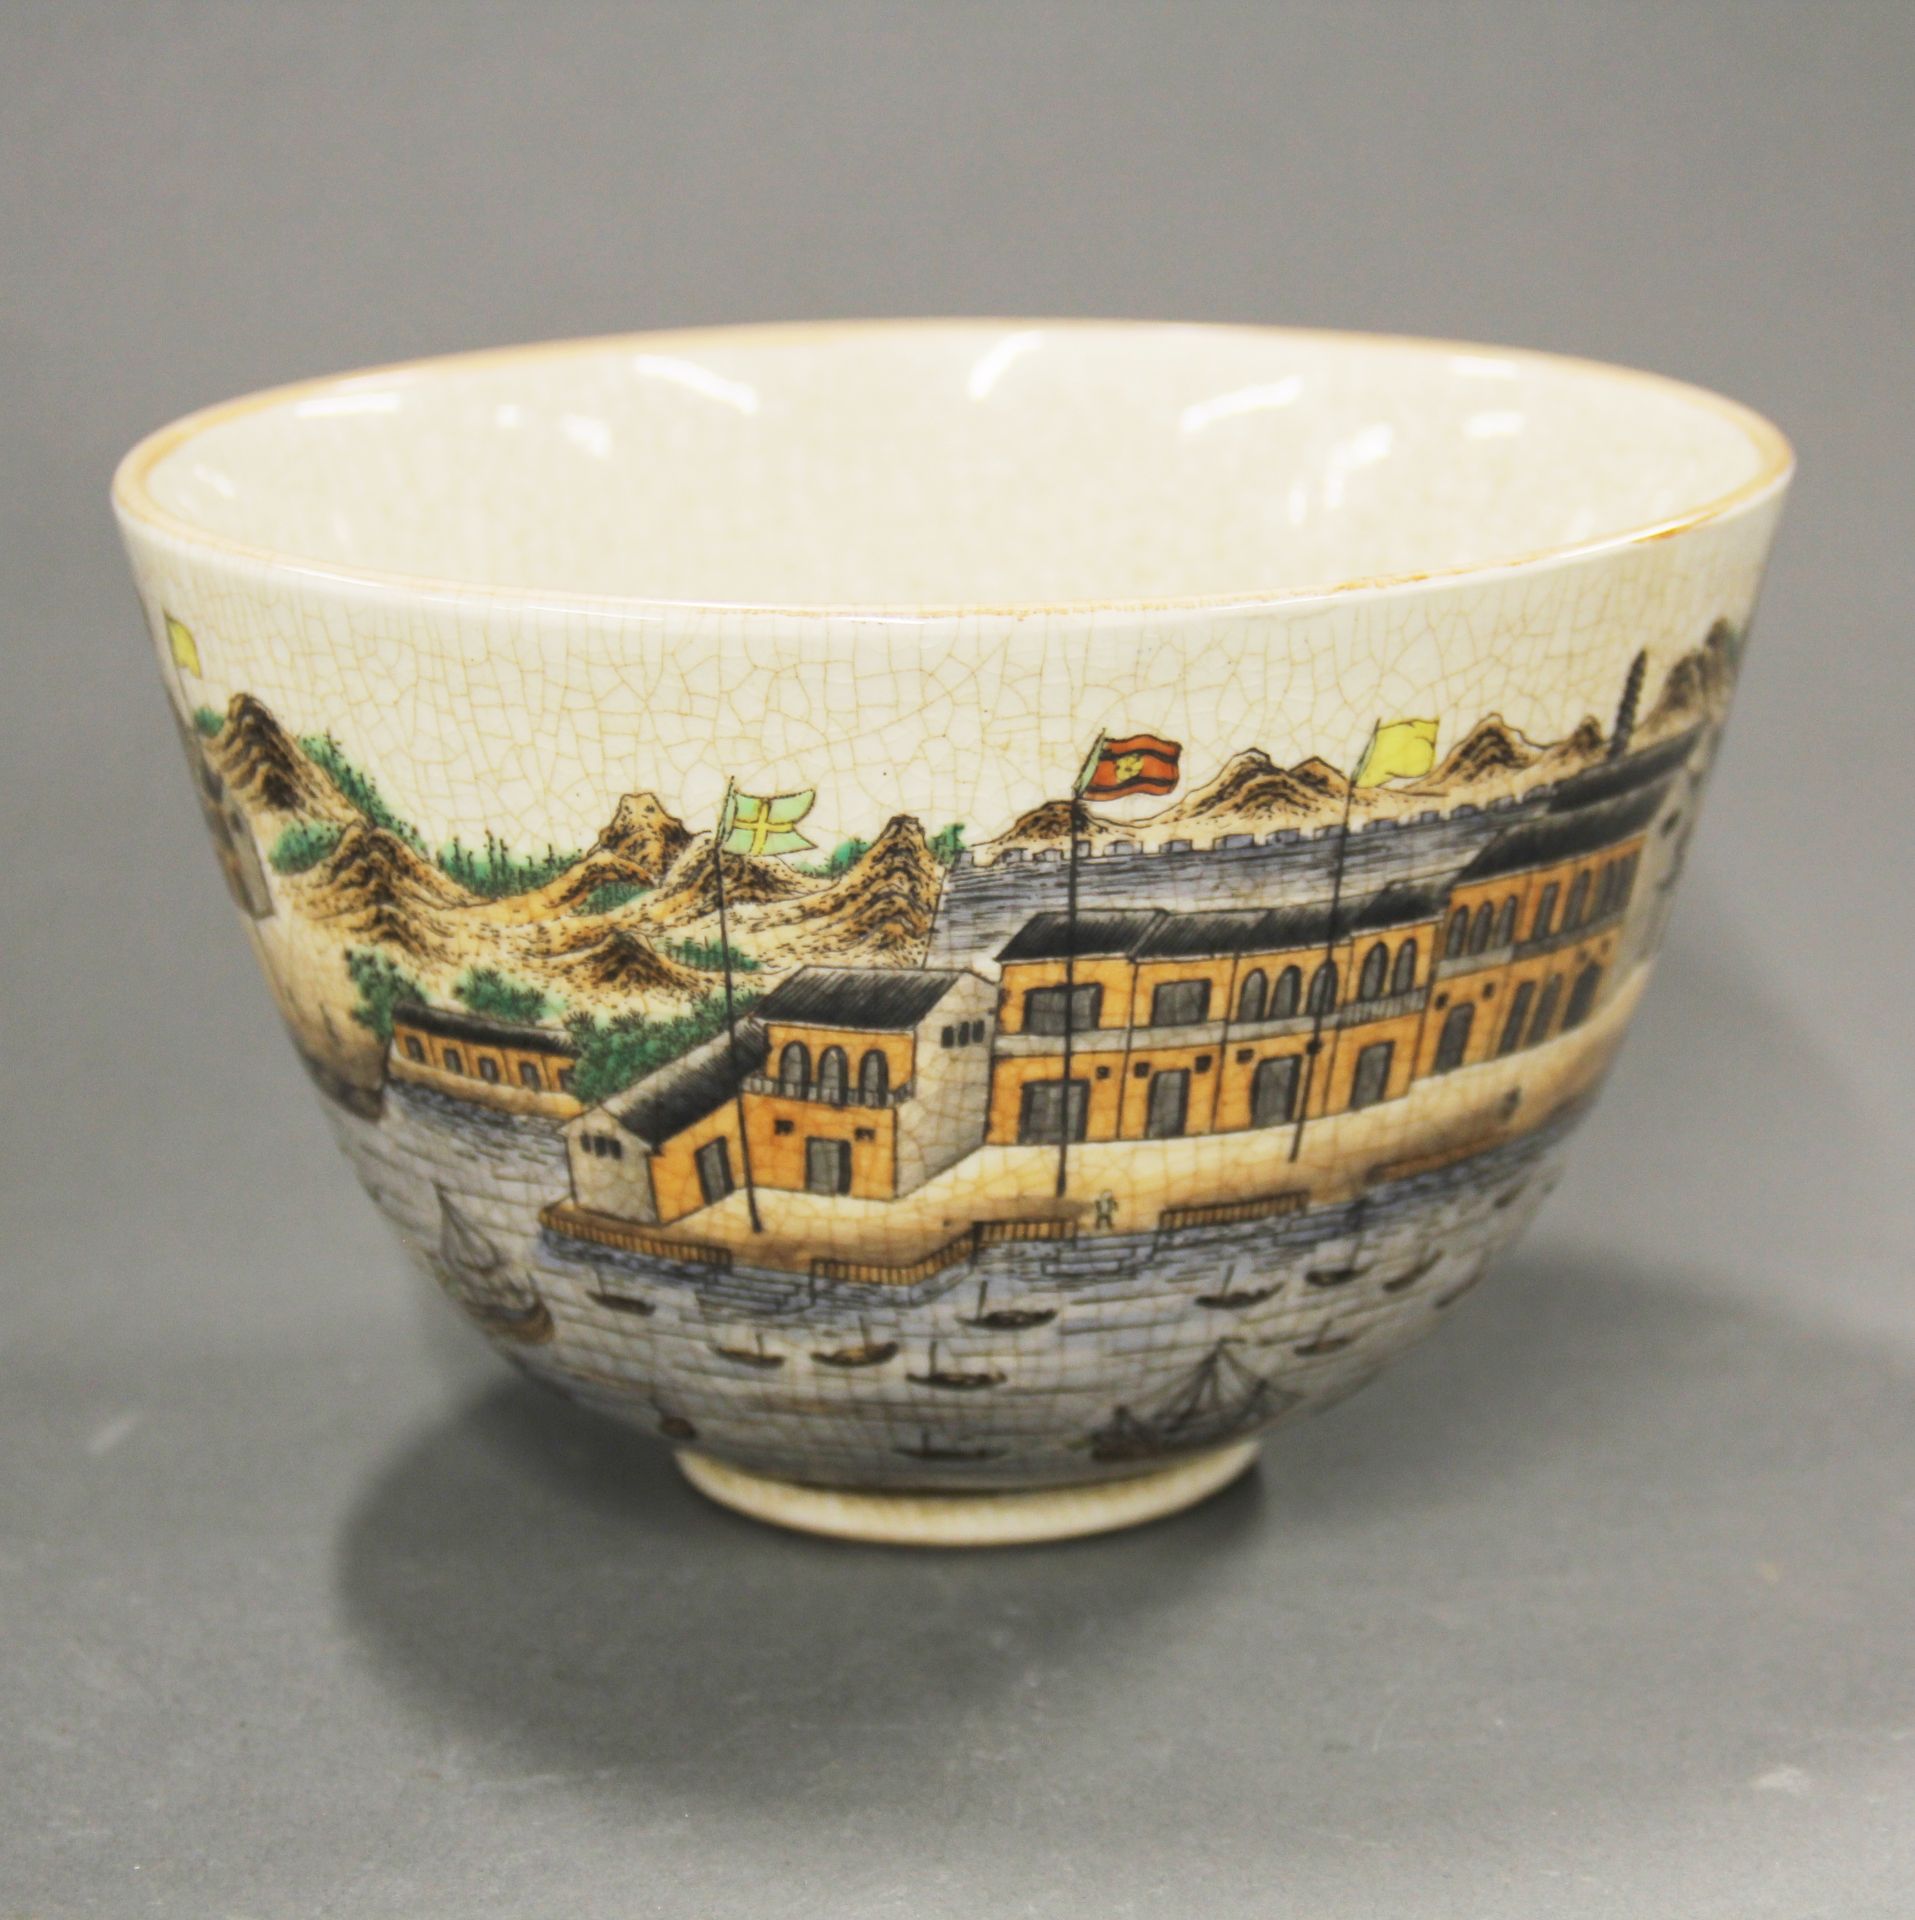 A 19thC relief decorated jug with a Chinese crackle glazed porcelain bowl depicting shipping - Image 4 of 6